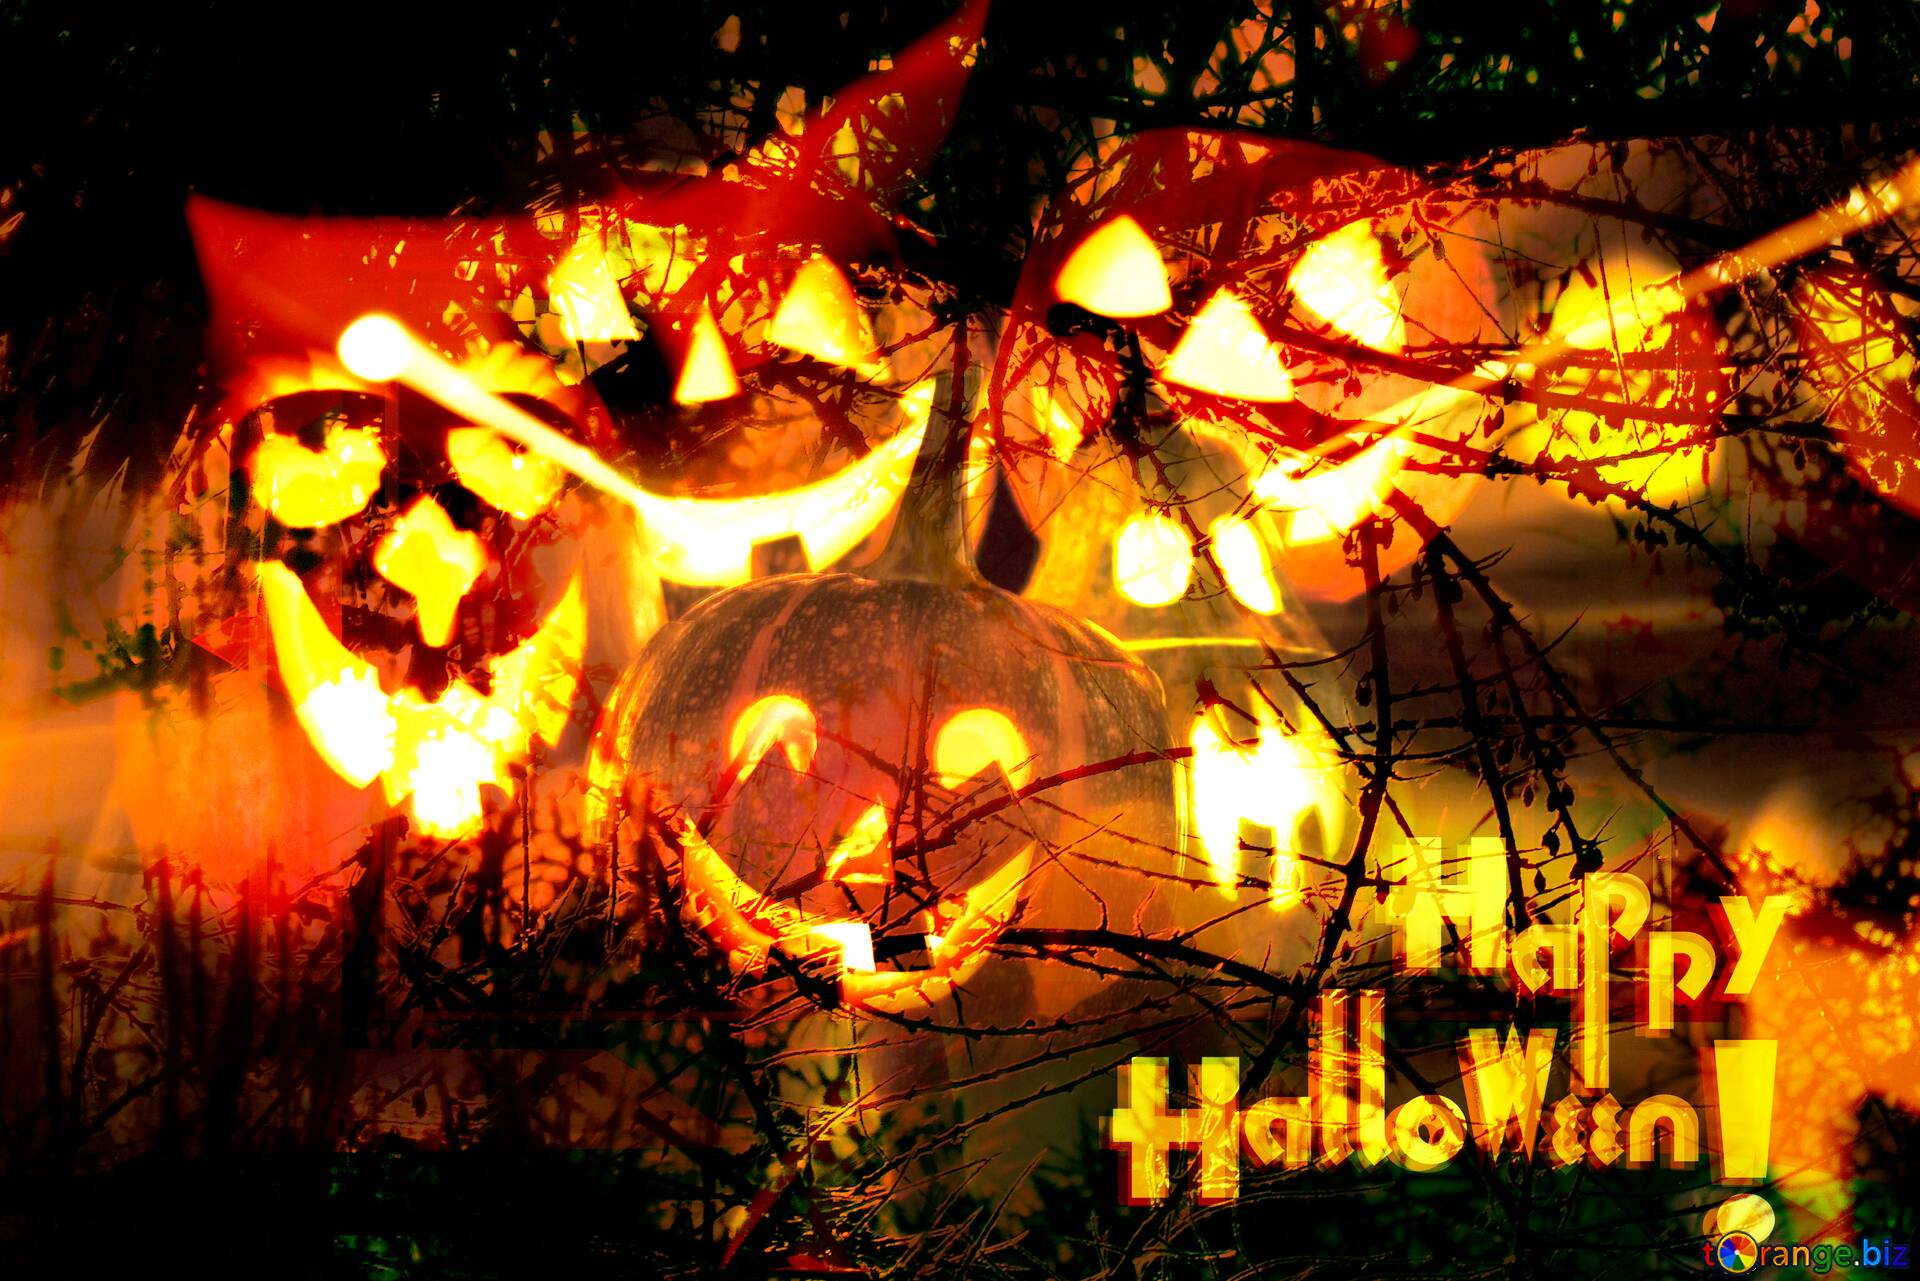 Download Free Picture Wallpaper Halloween Spooky Forest On CC BY License Free Image Stock TOrange.biz Fx №193572